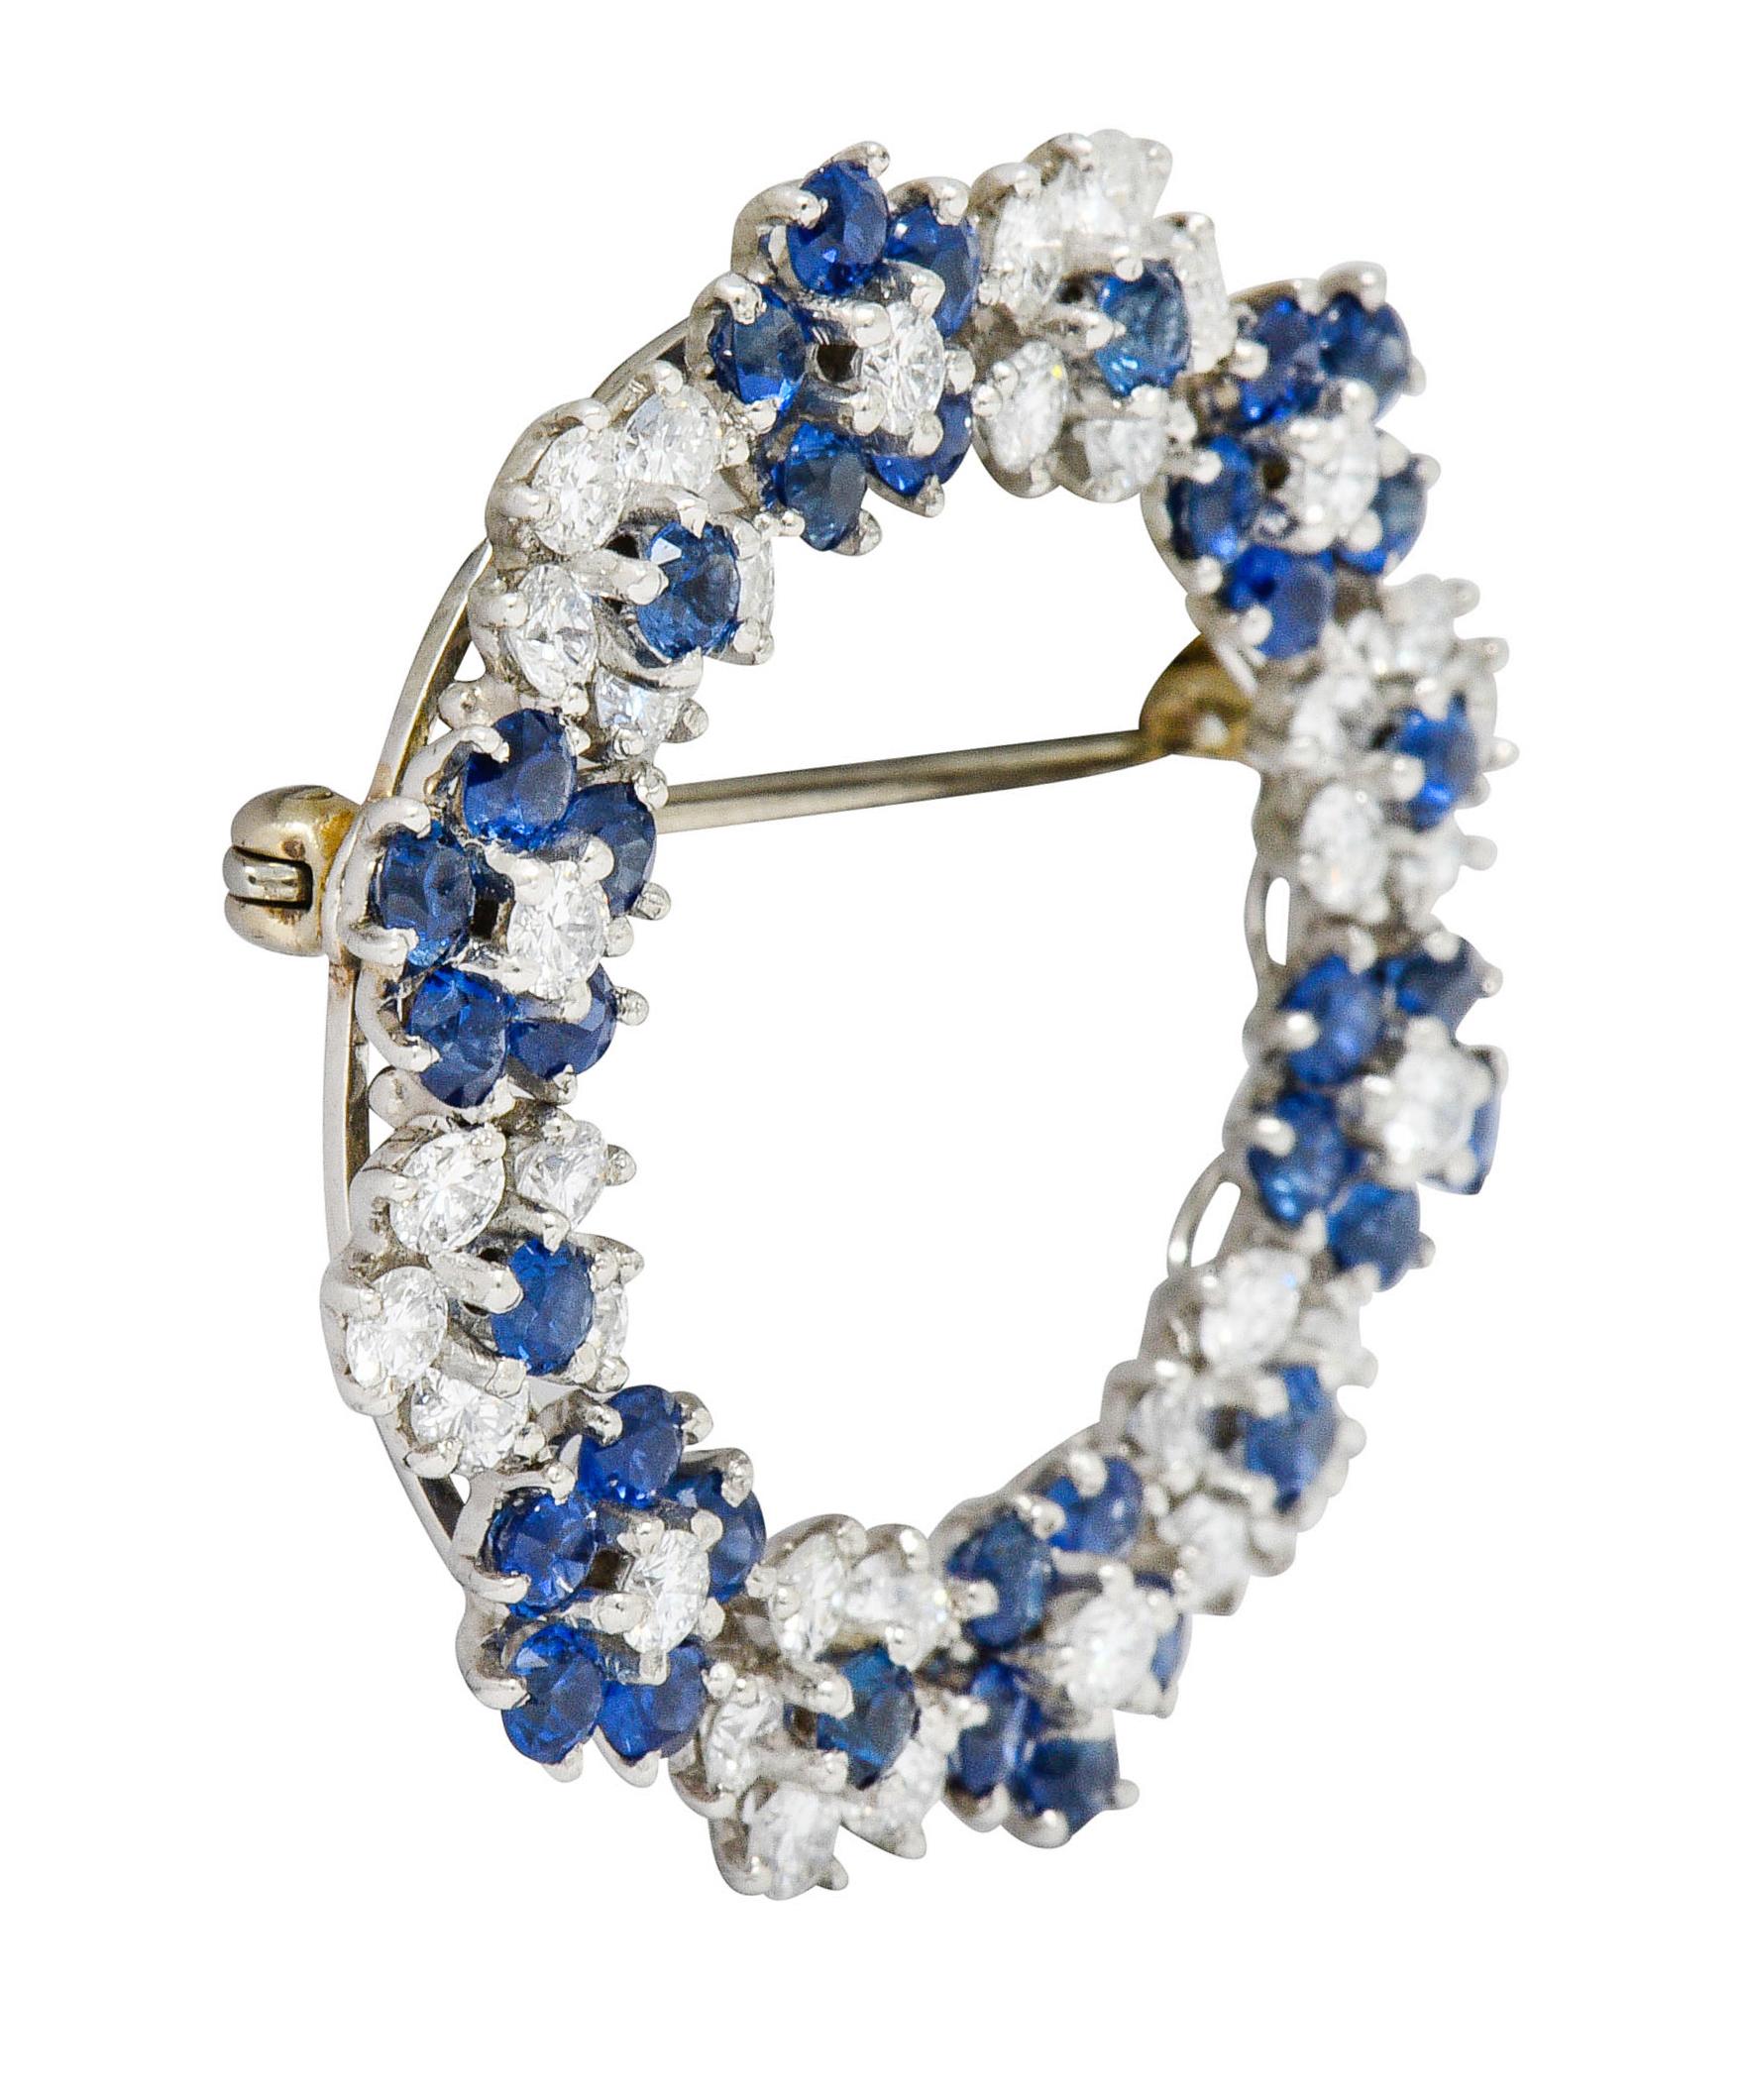 Circular brooch is designed with floral clusters of sapphire and diamonds

Round brilliant cut diamonds weigh in total approximately 2.16 carats; F/G color with VS clarity

Round cut sapphires are bright blue in color, well-matched, and weigh